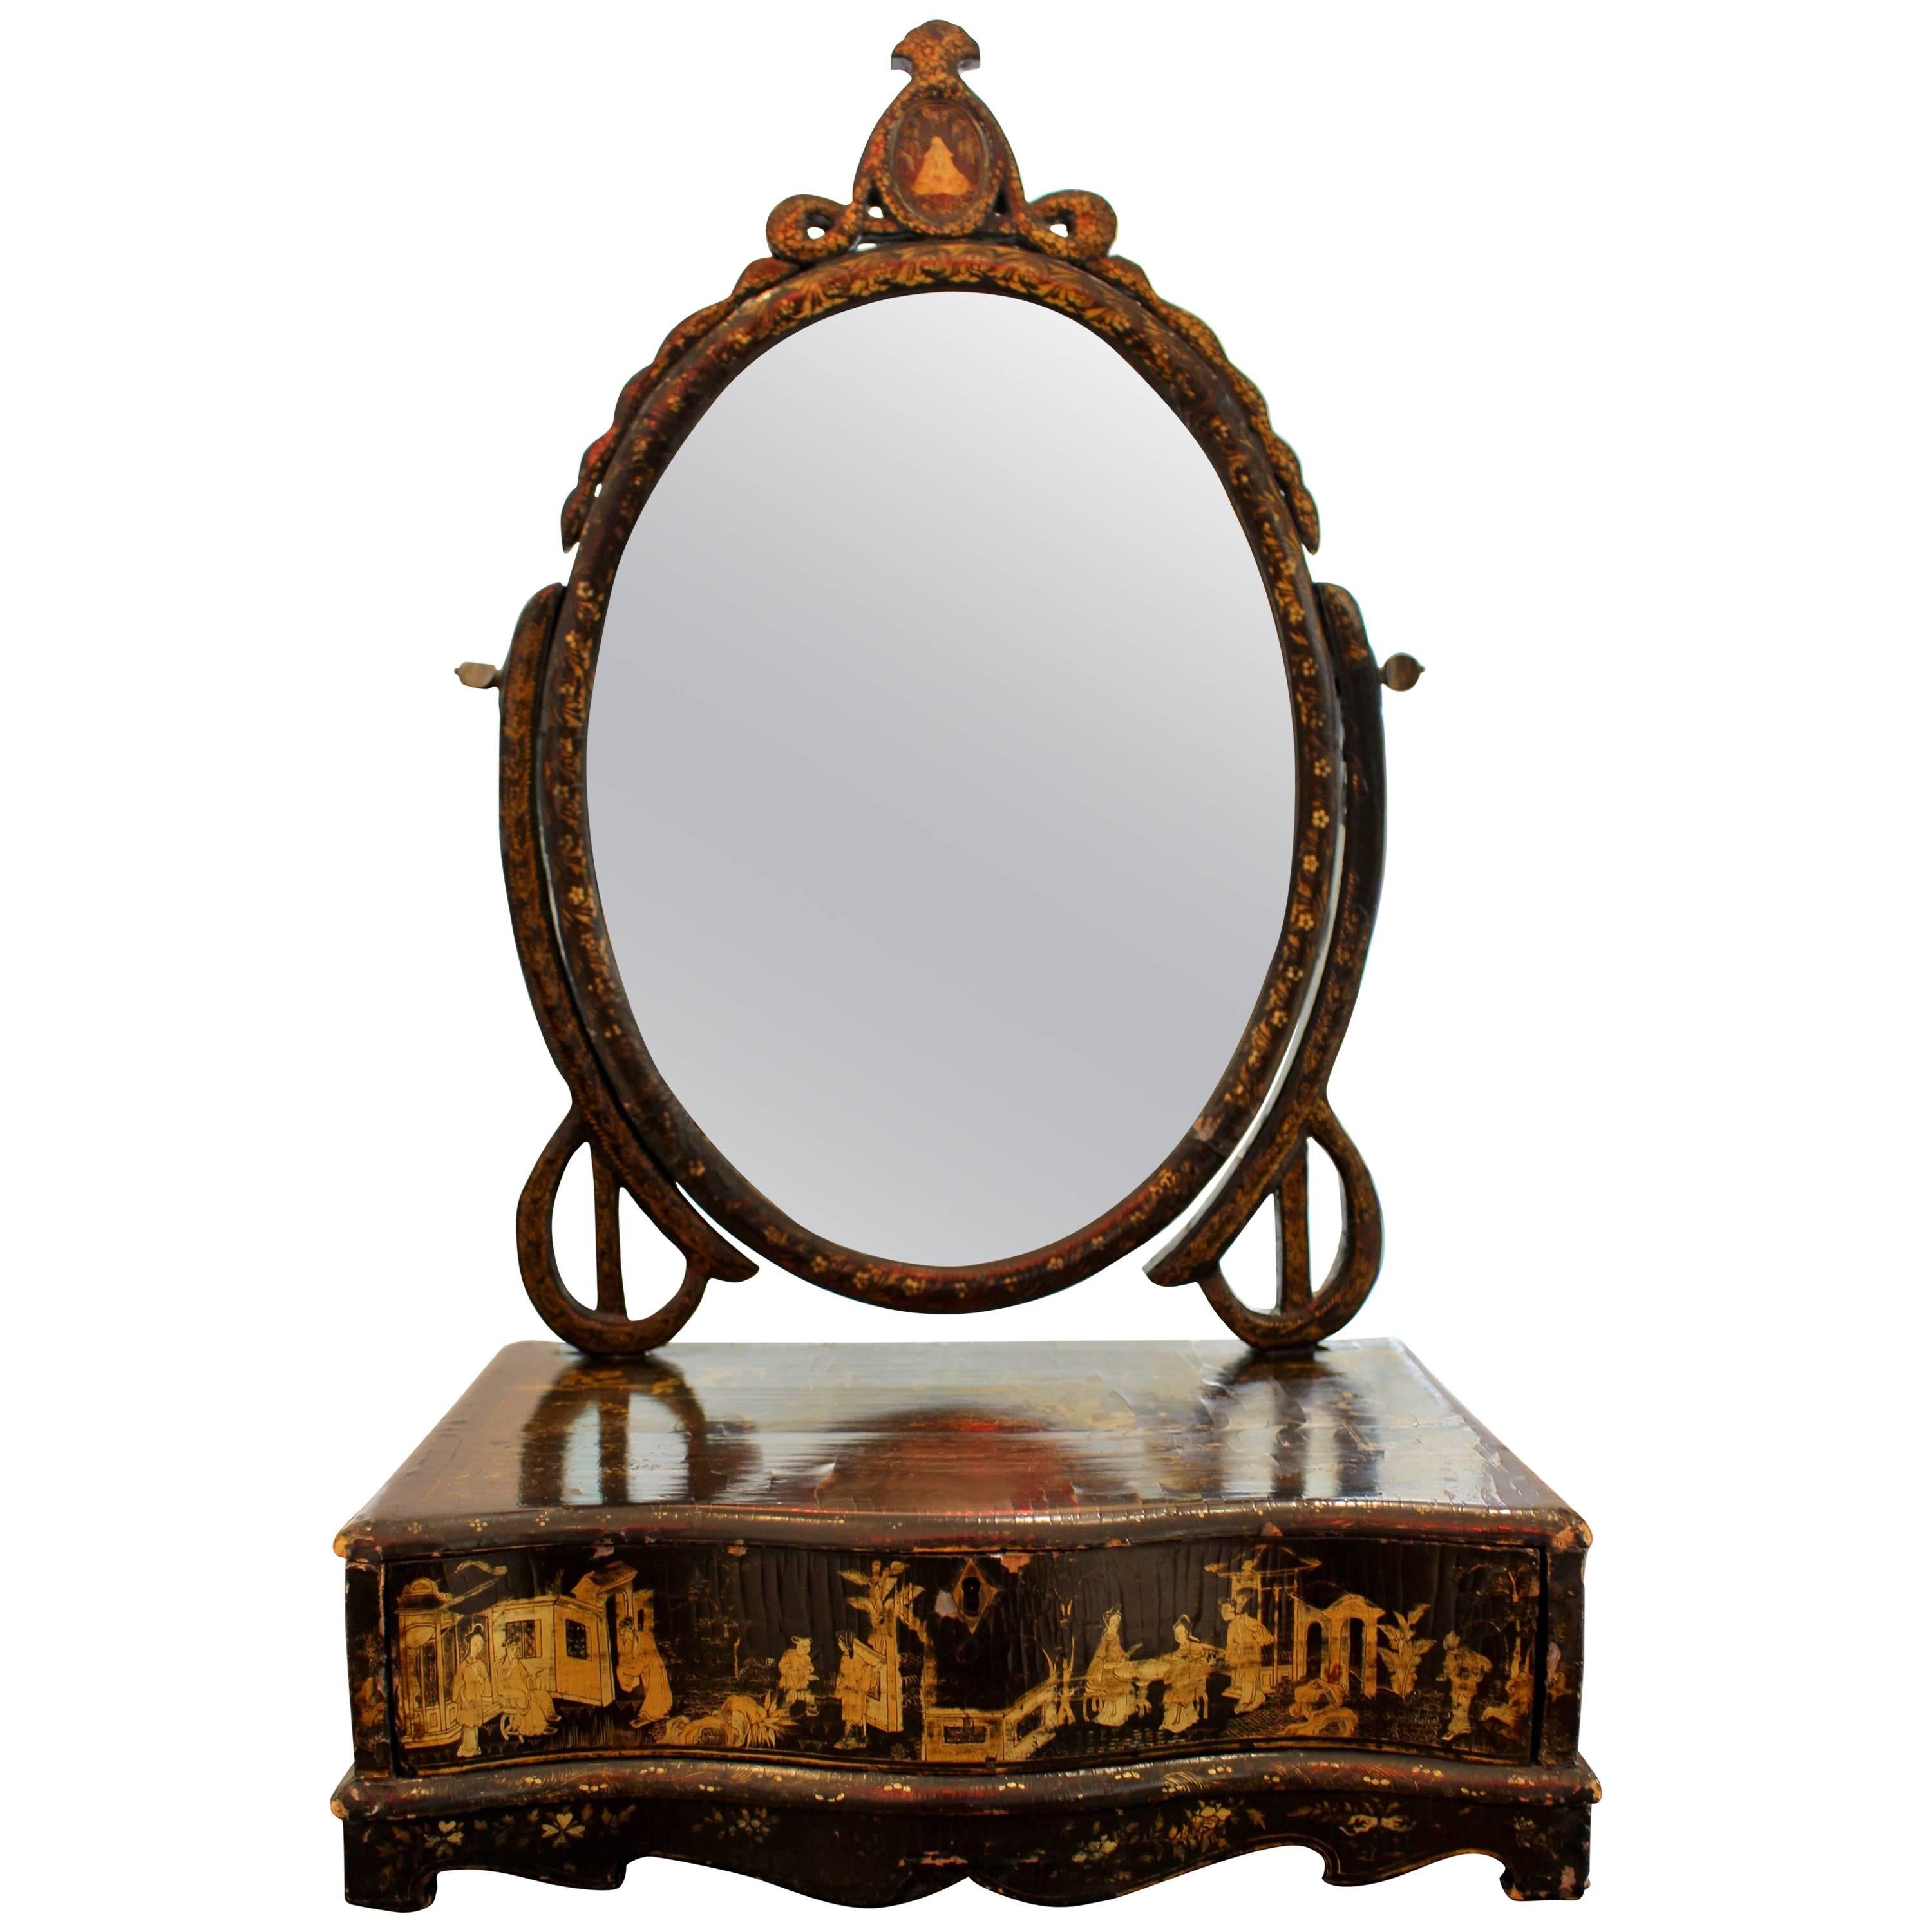 Serpentine-Front Chinese Gilt-Decorated Chinoiserie Dressing Table Mirror For Sale